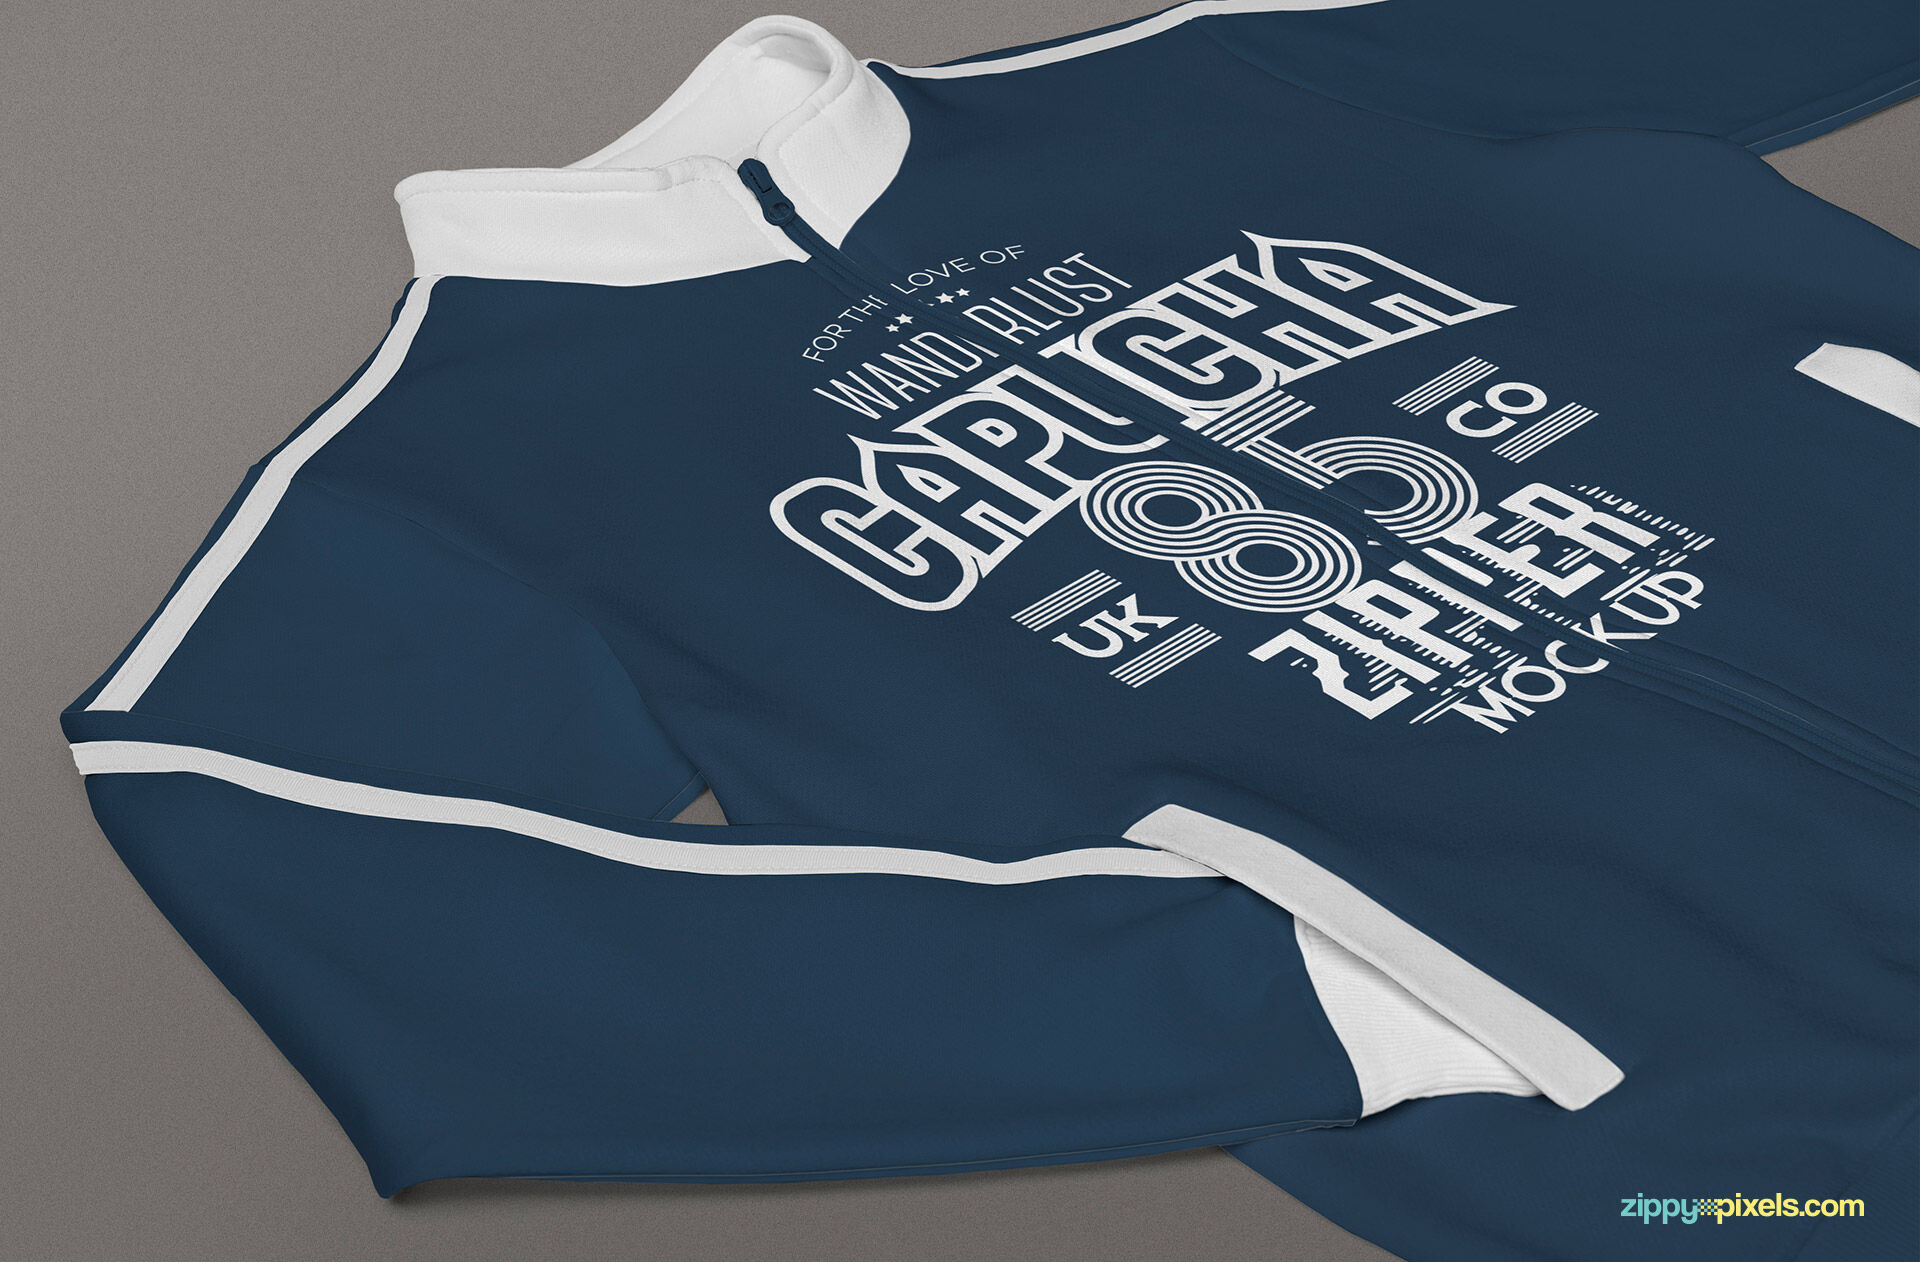 Perspective View of a Jacket Mockup FREE PSD